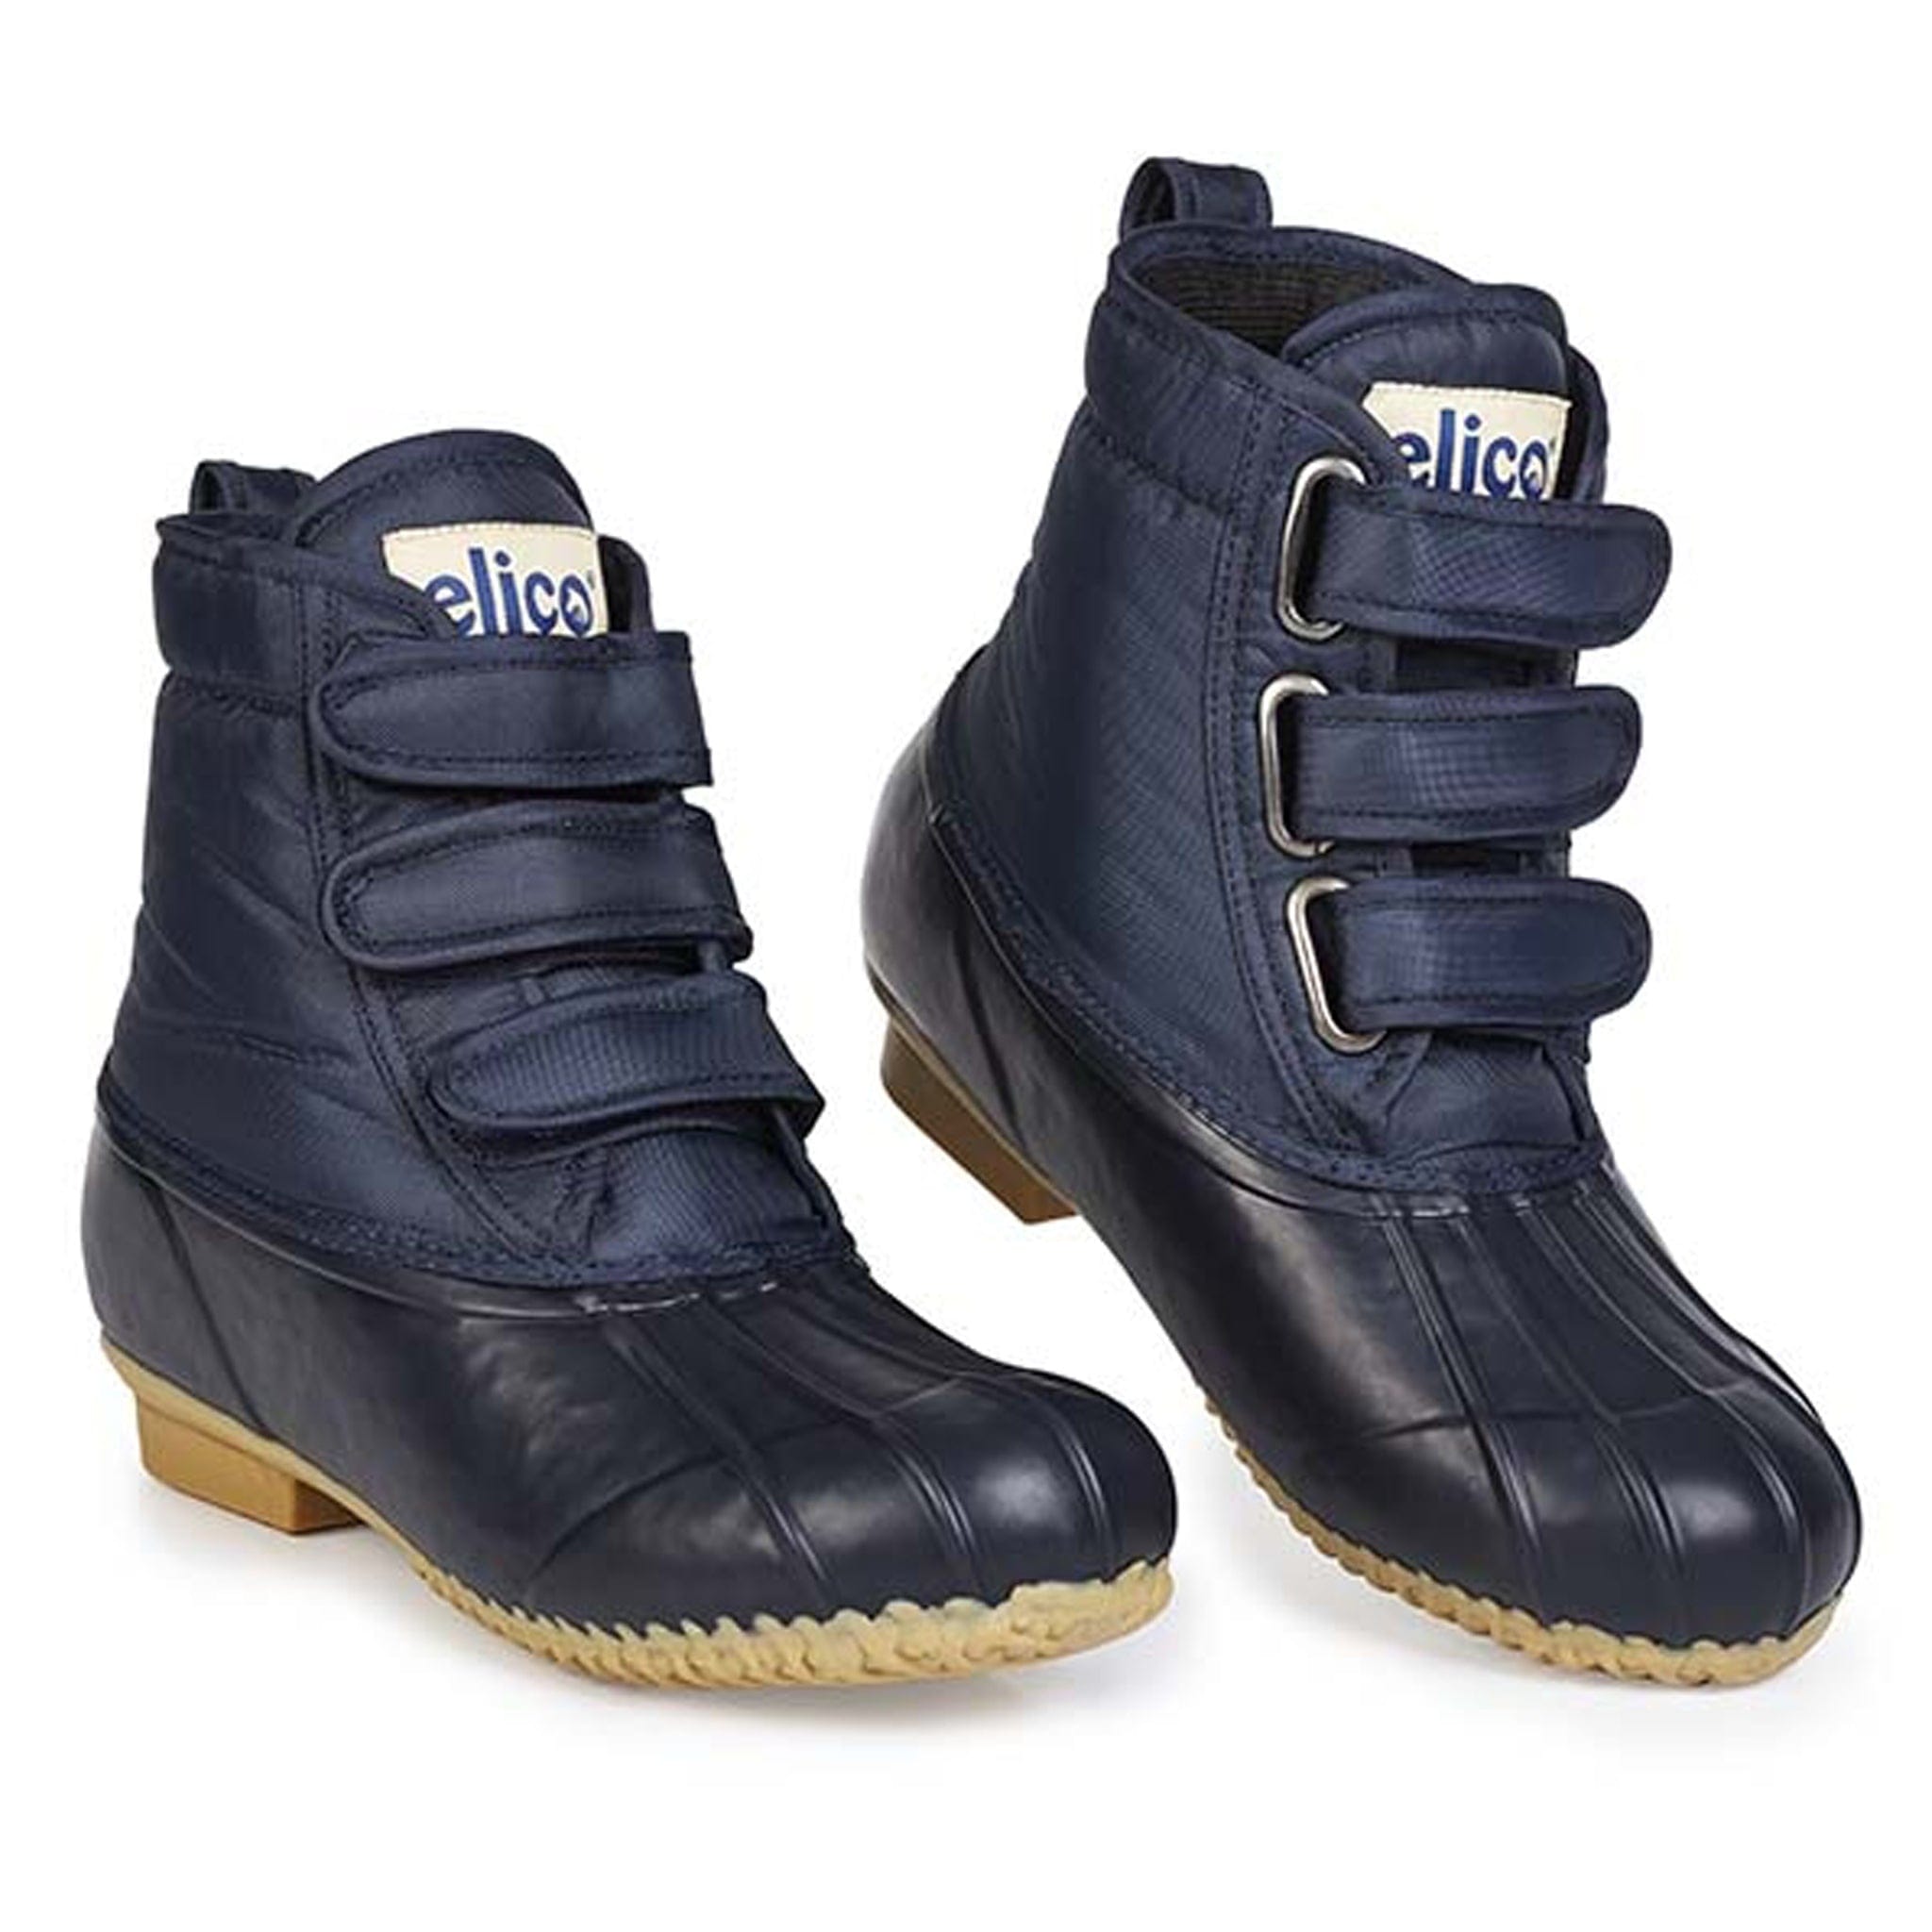 Elico Airedale Short Yard Boots Navy Pair